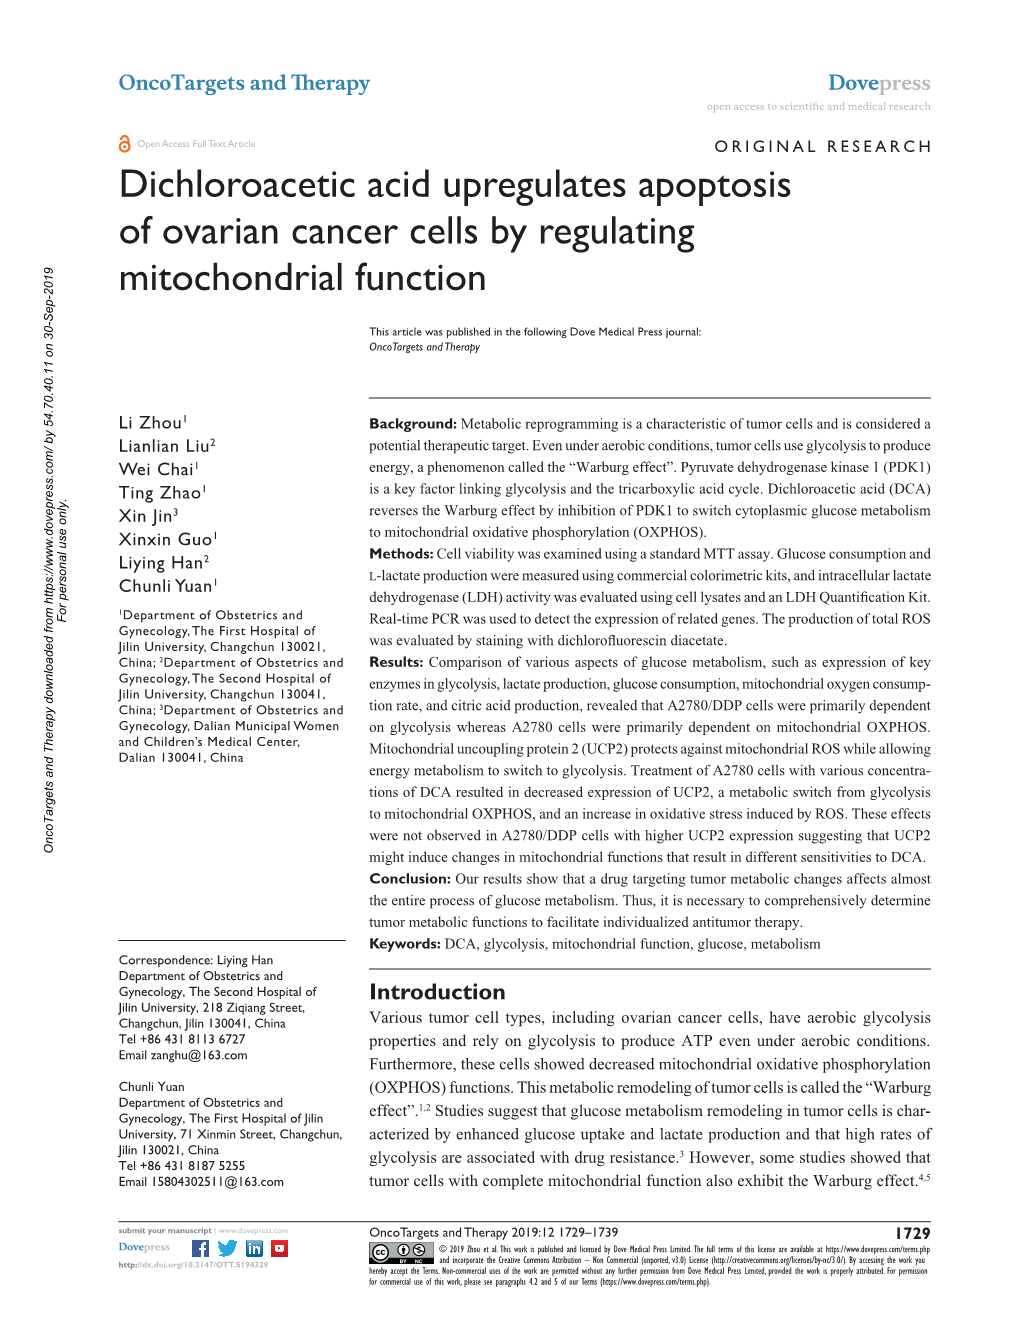 Dichloroacetic Acid Upregulates Apoptosis of Ovarian Cancer Cells by Regulating Mitochondrial Function